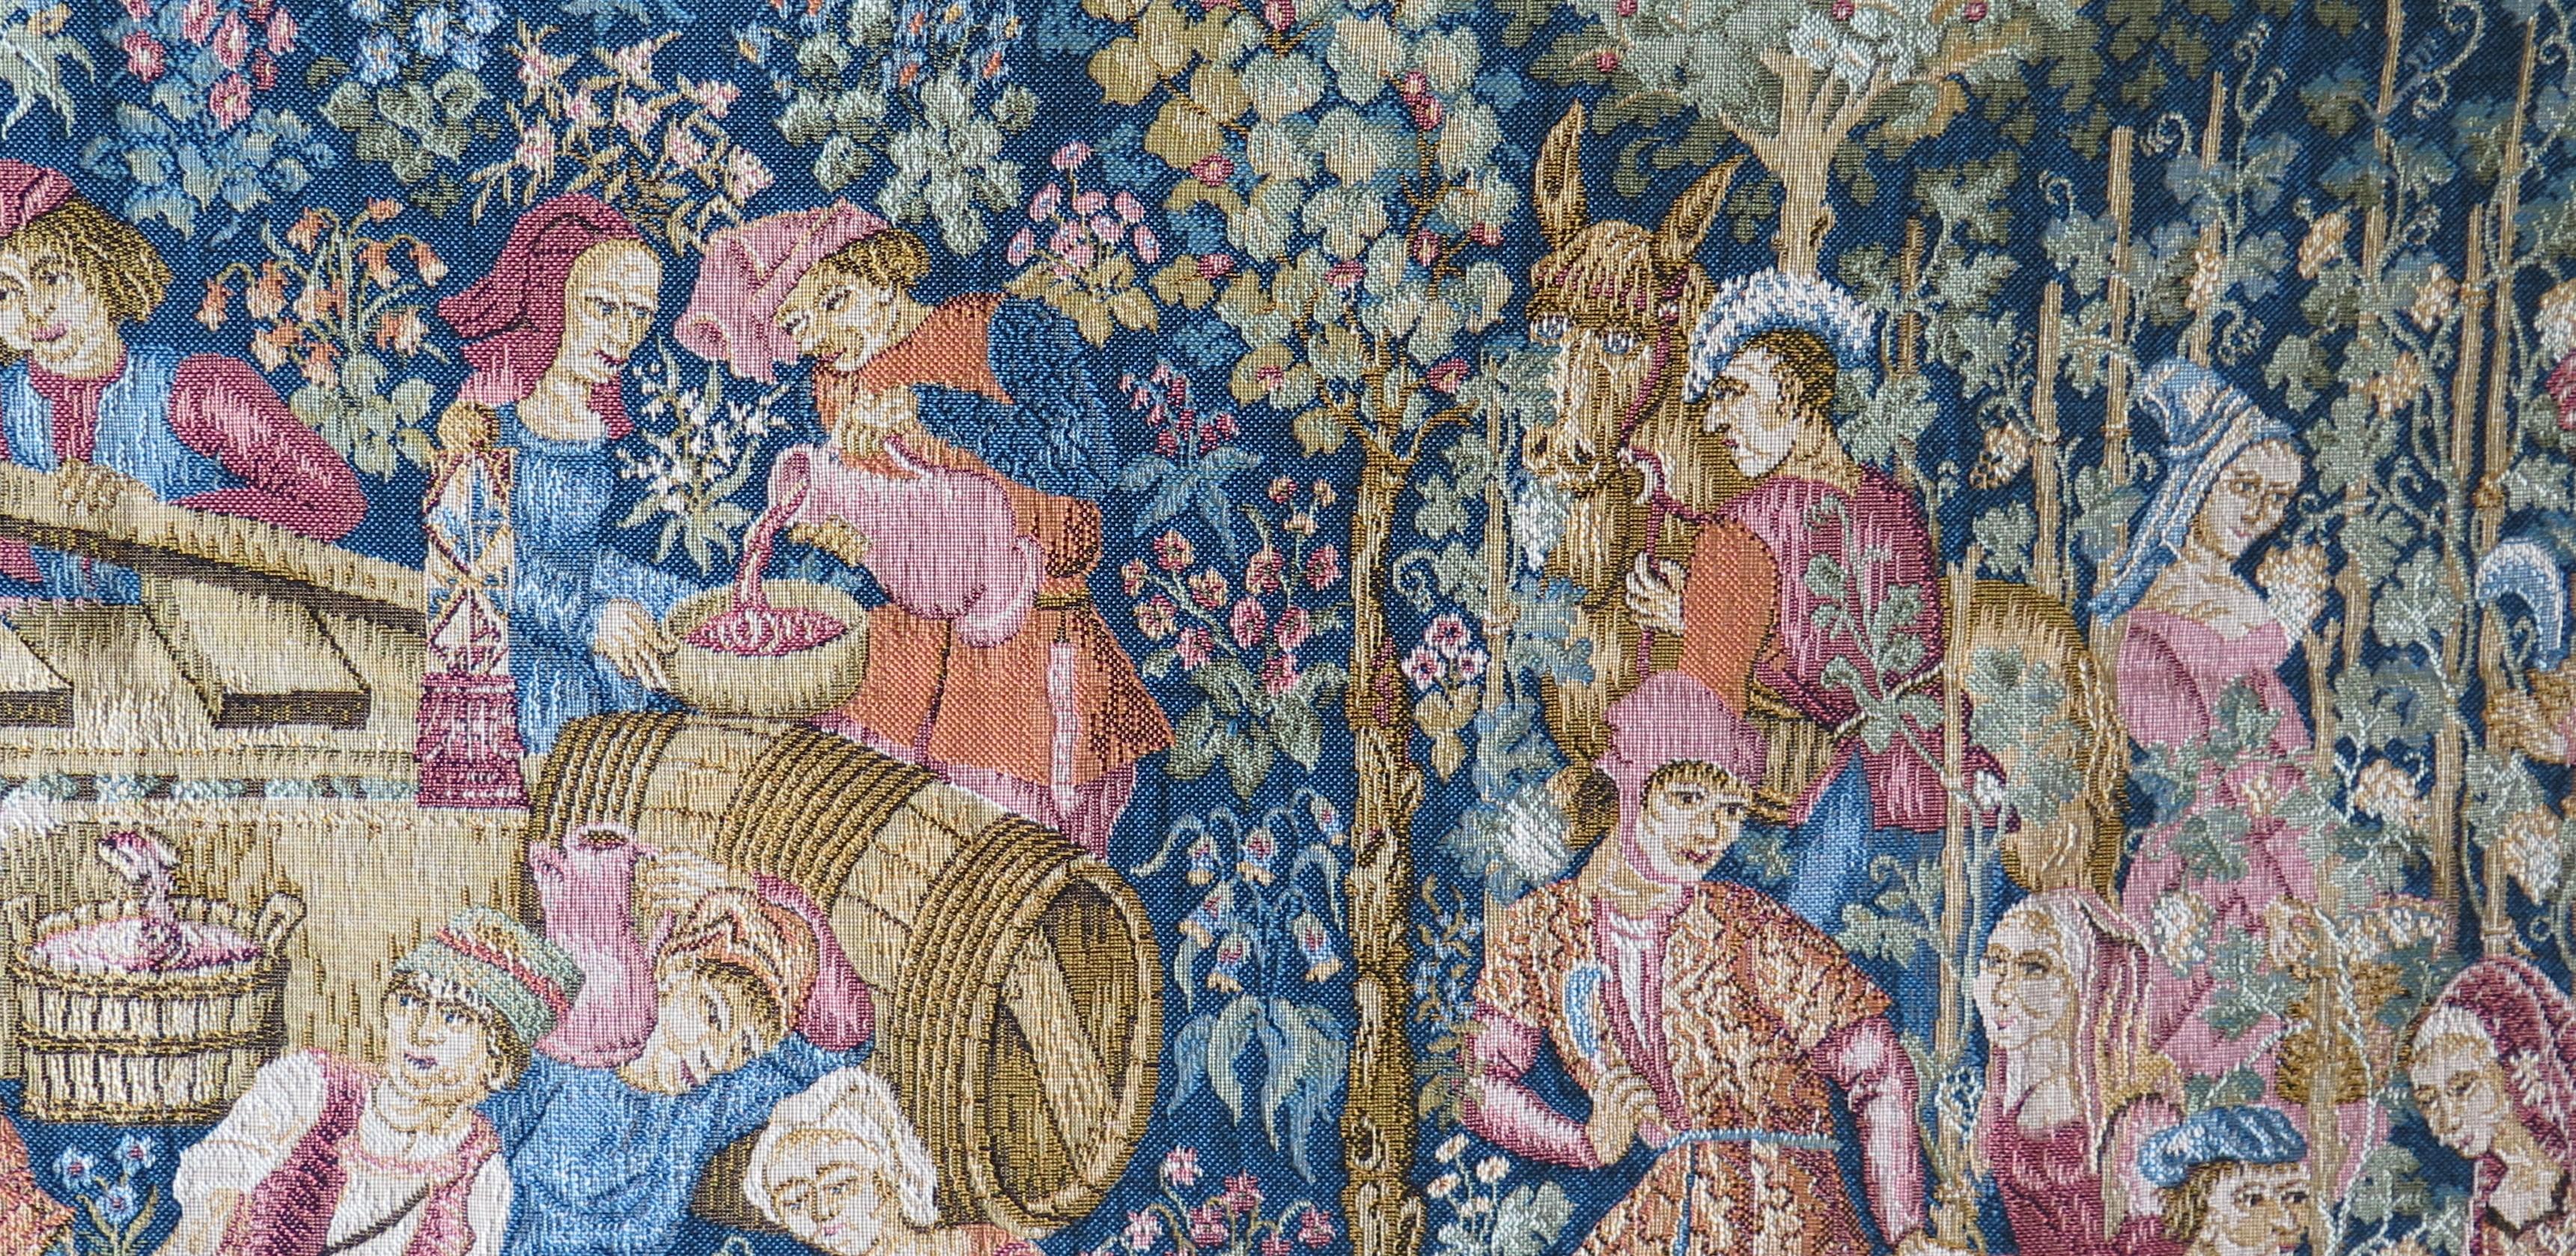 Woven Wall Hanging Tapestry Depicting Wine Making, French, 20th Century 6